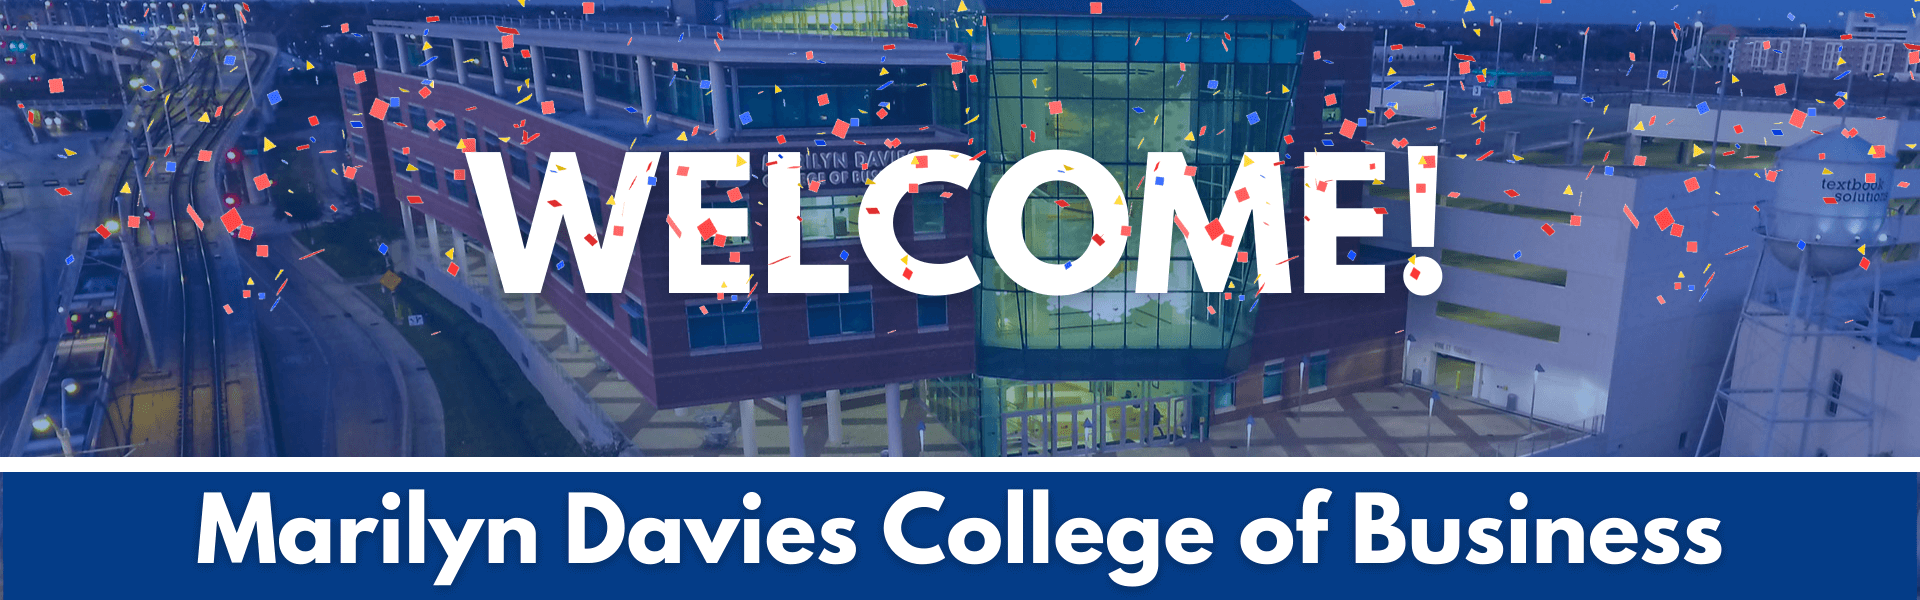 Welcome Marilyn Davies College of Business